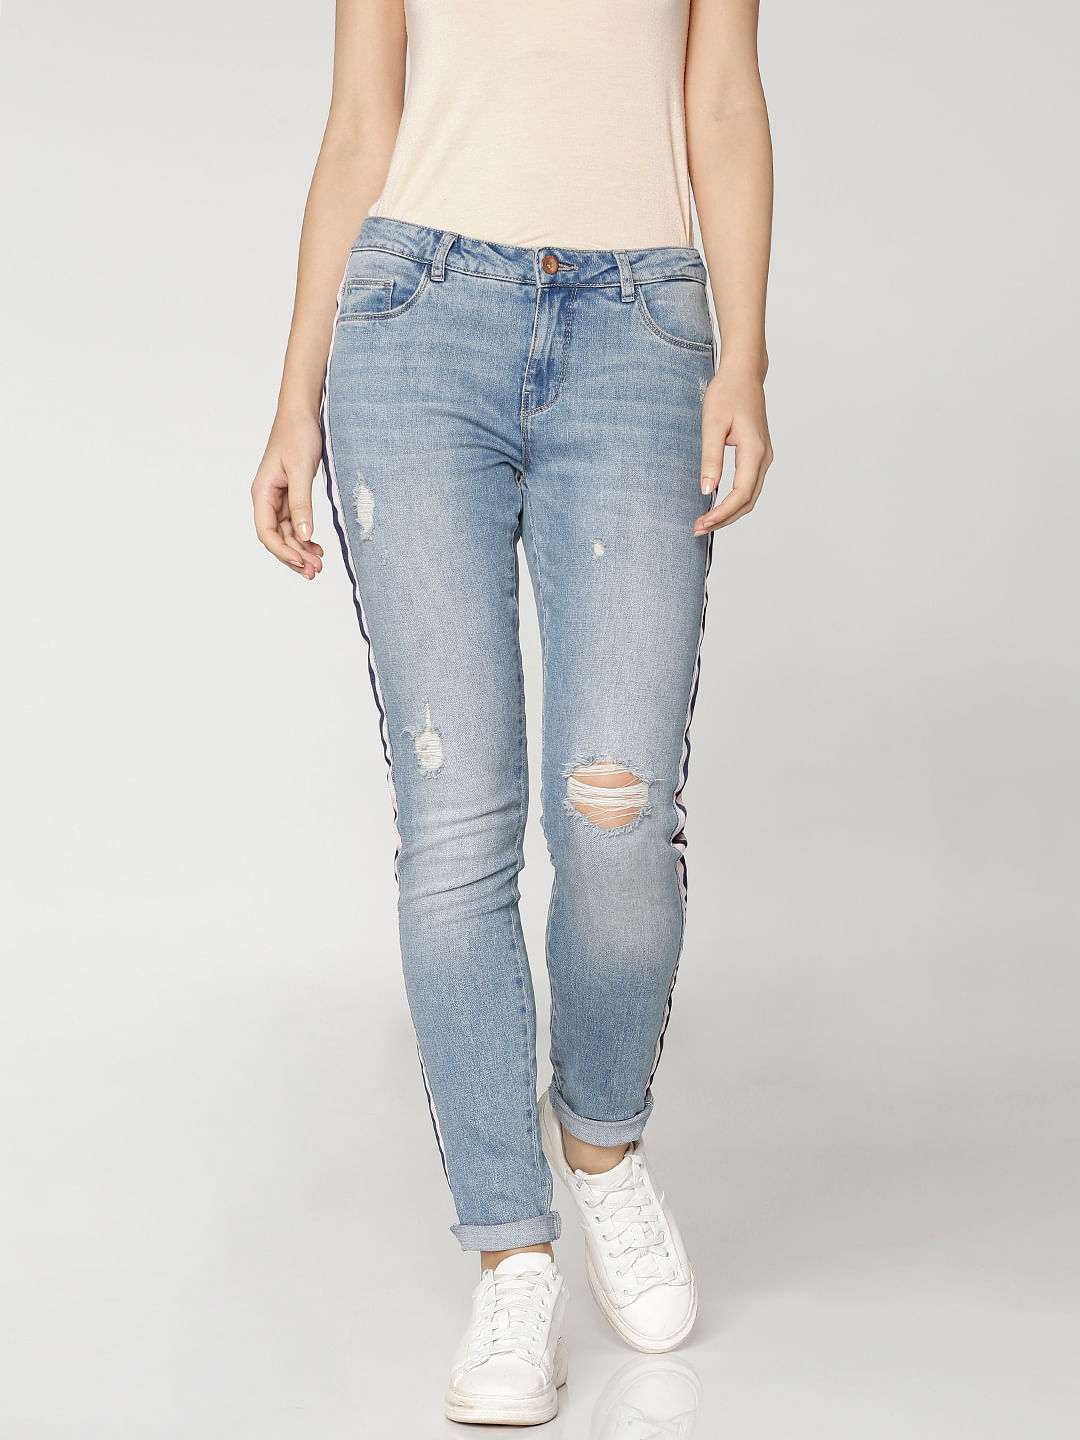 tape side jeans for girls